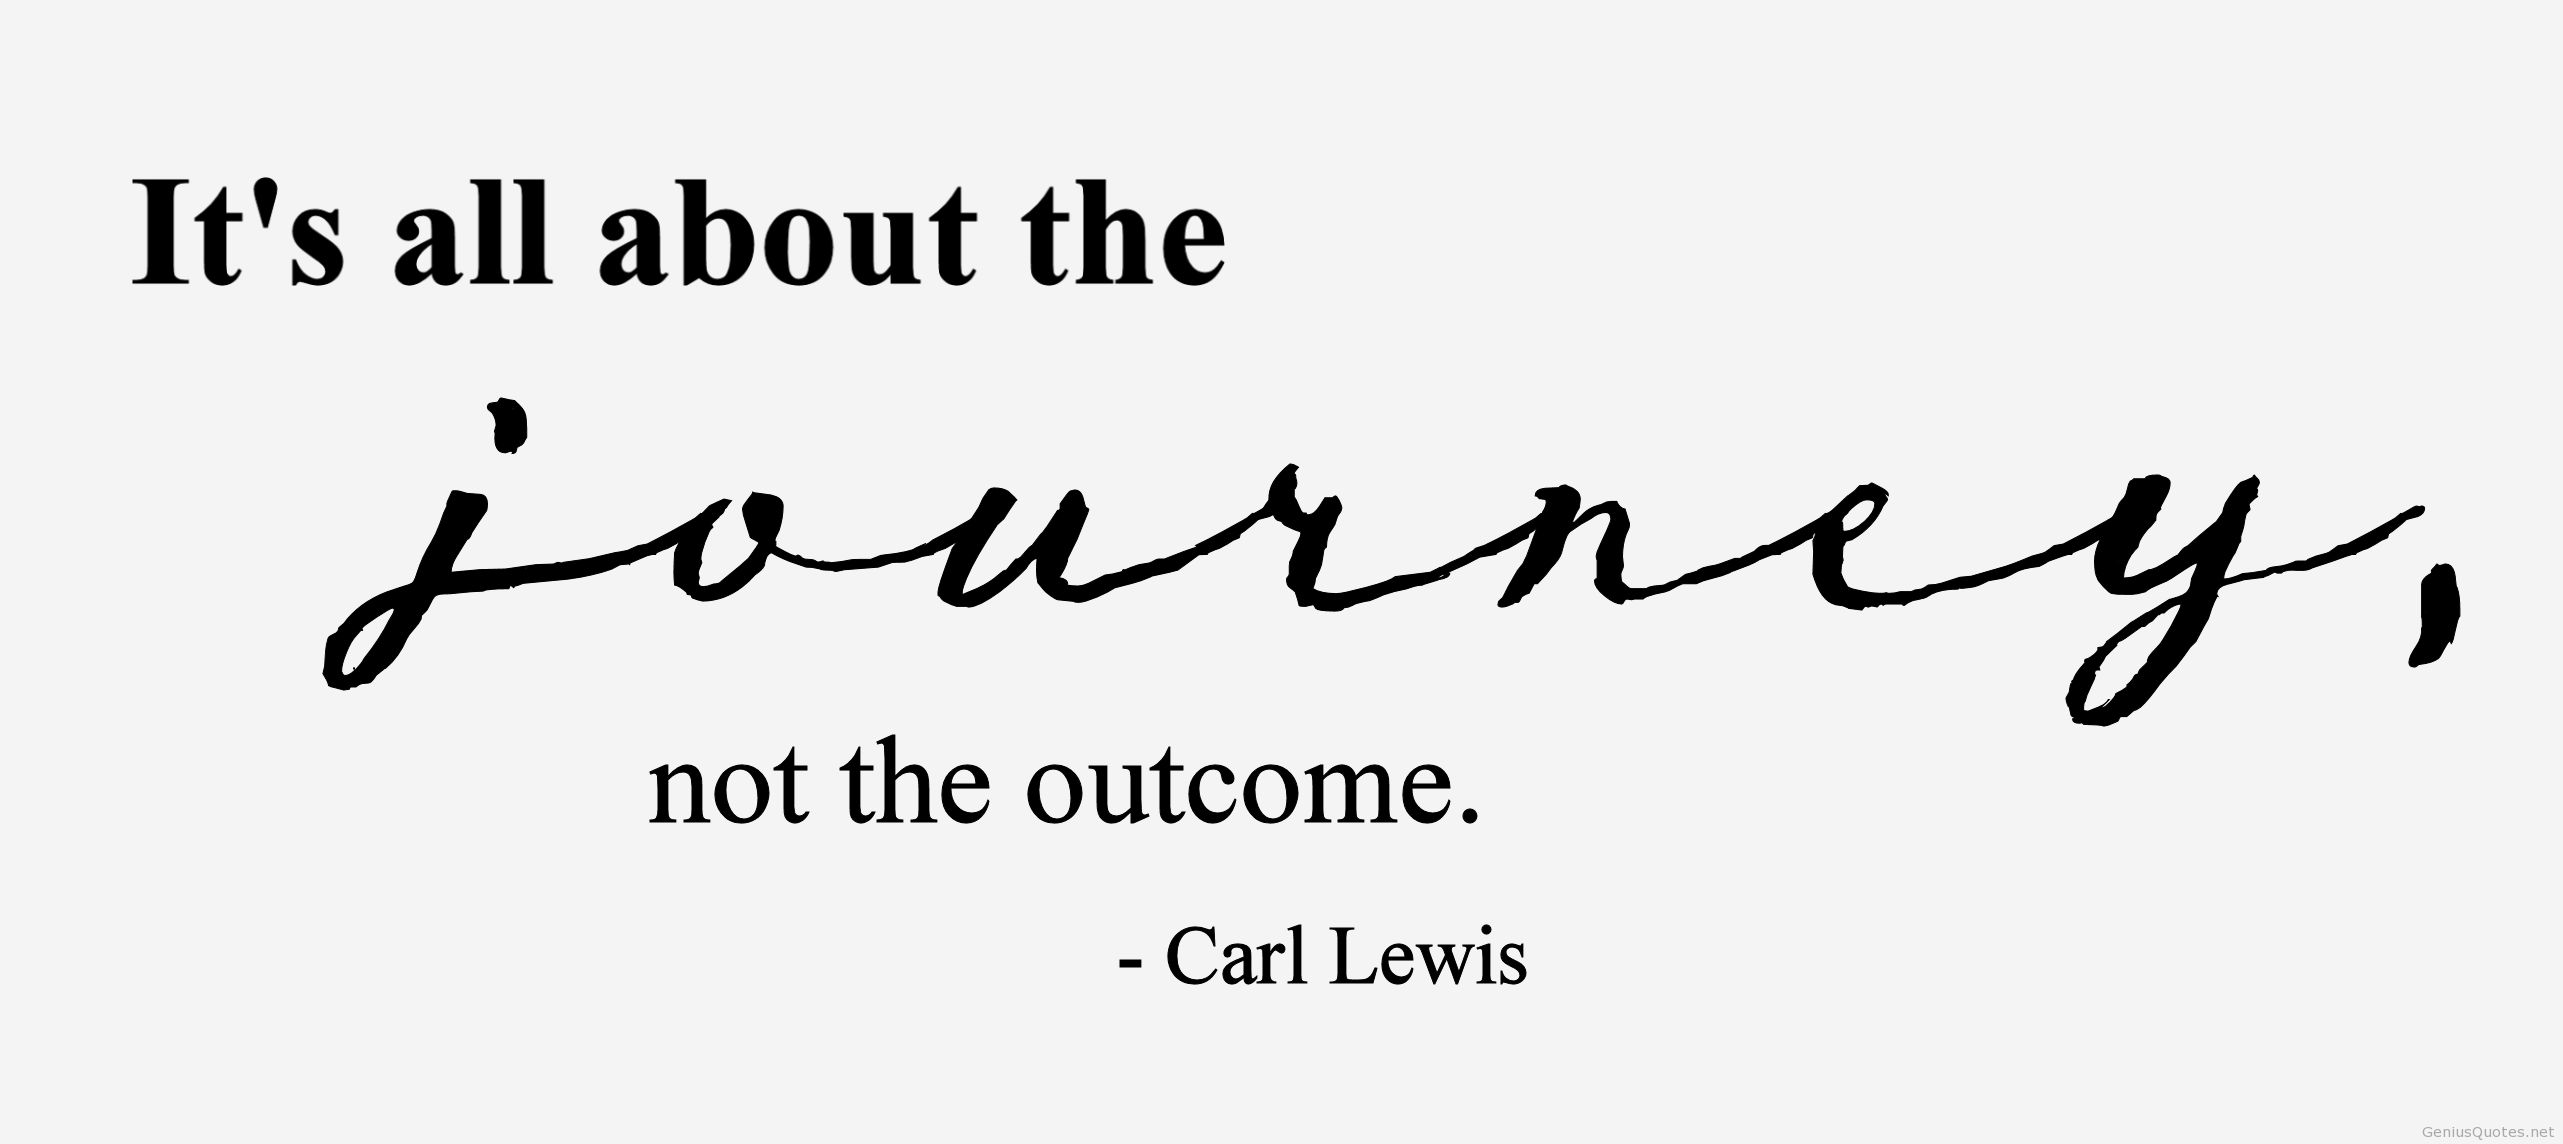 It’s all about the journey not the outcome. Carl Lewis